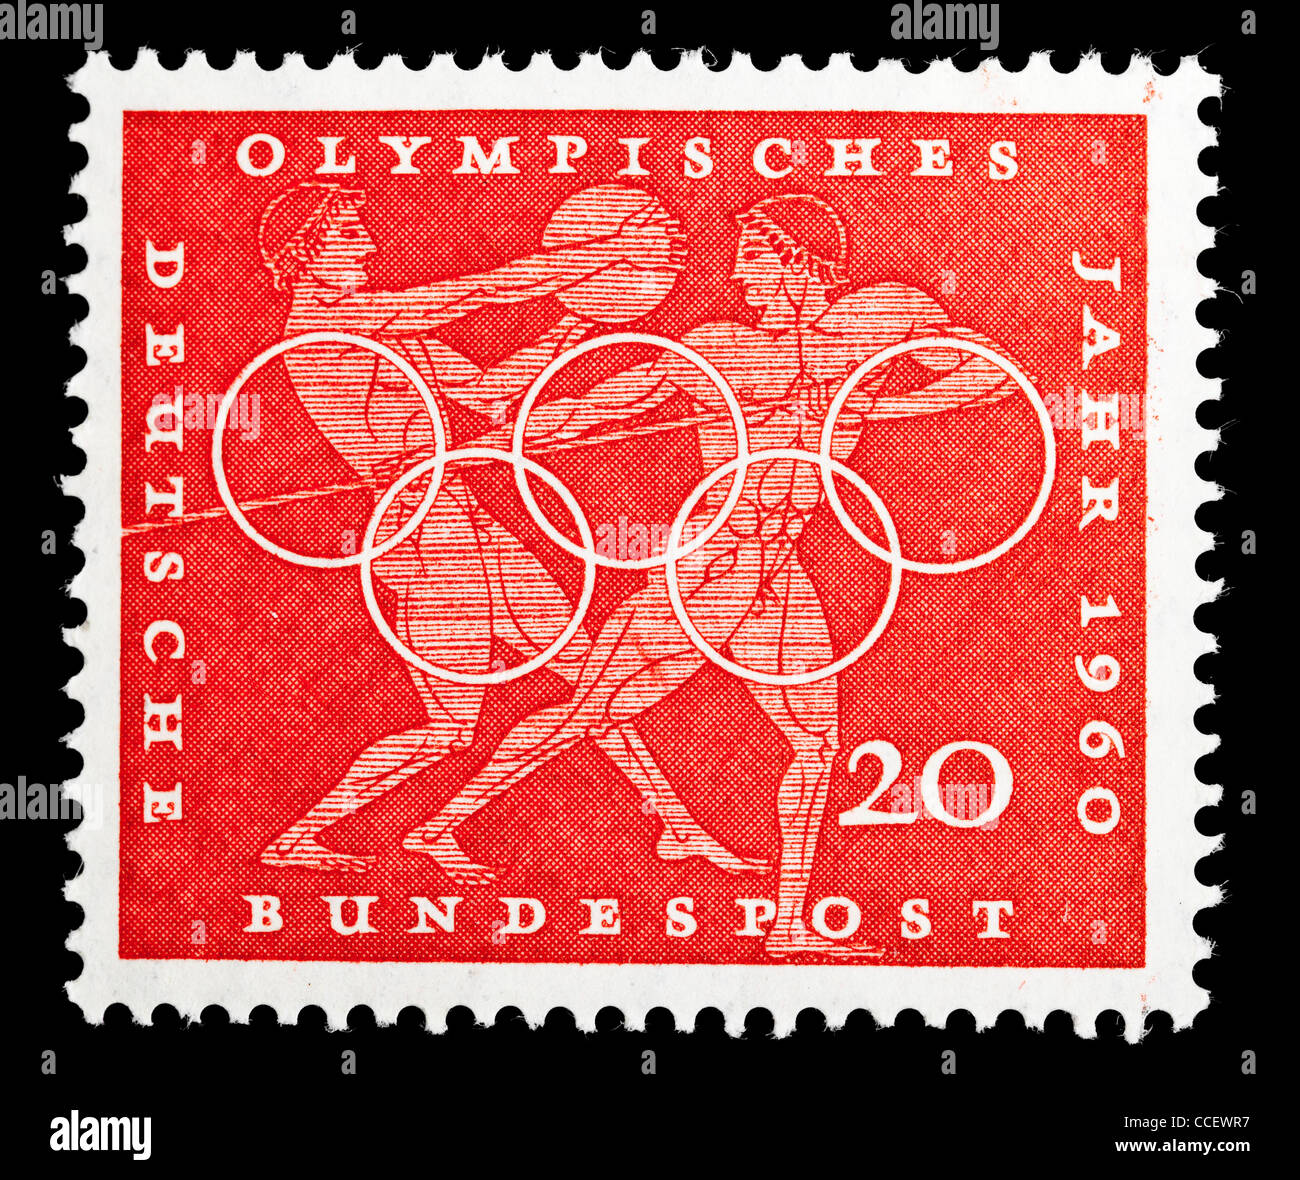 Postage stamp: Olympic Year 1960, BRD, Germany, mint condition Stock Photo